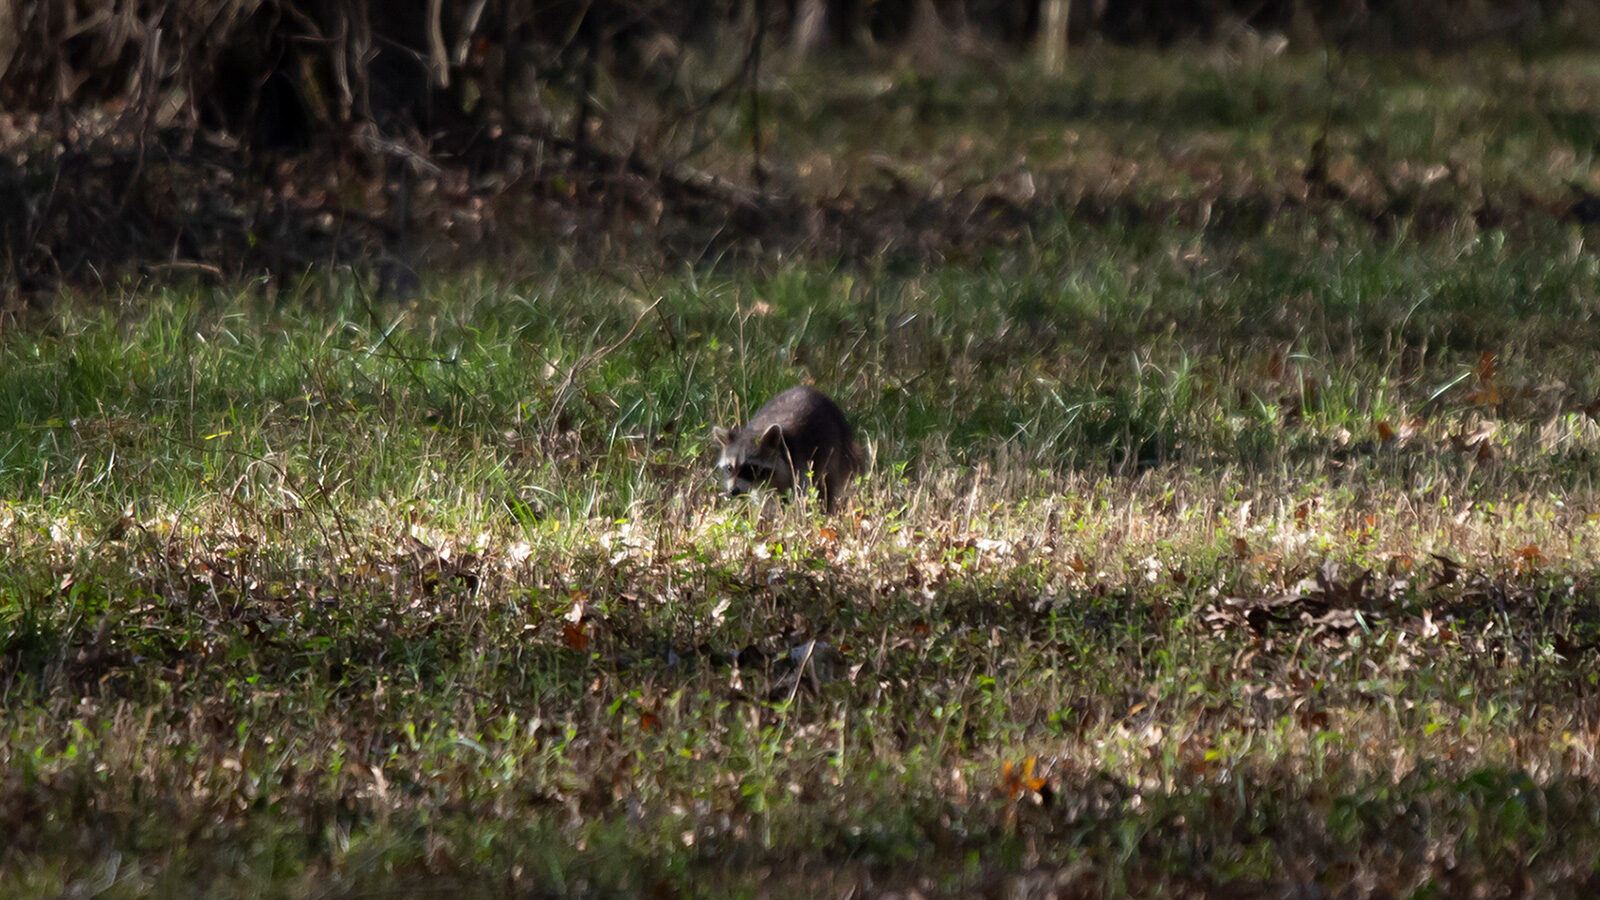 Common raccoon foraging in a field